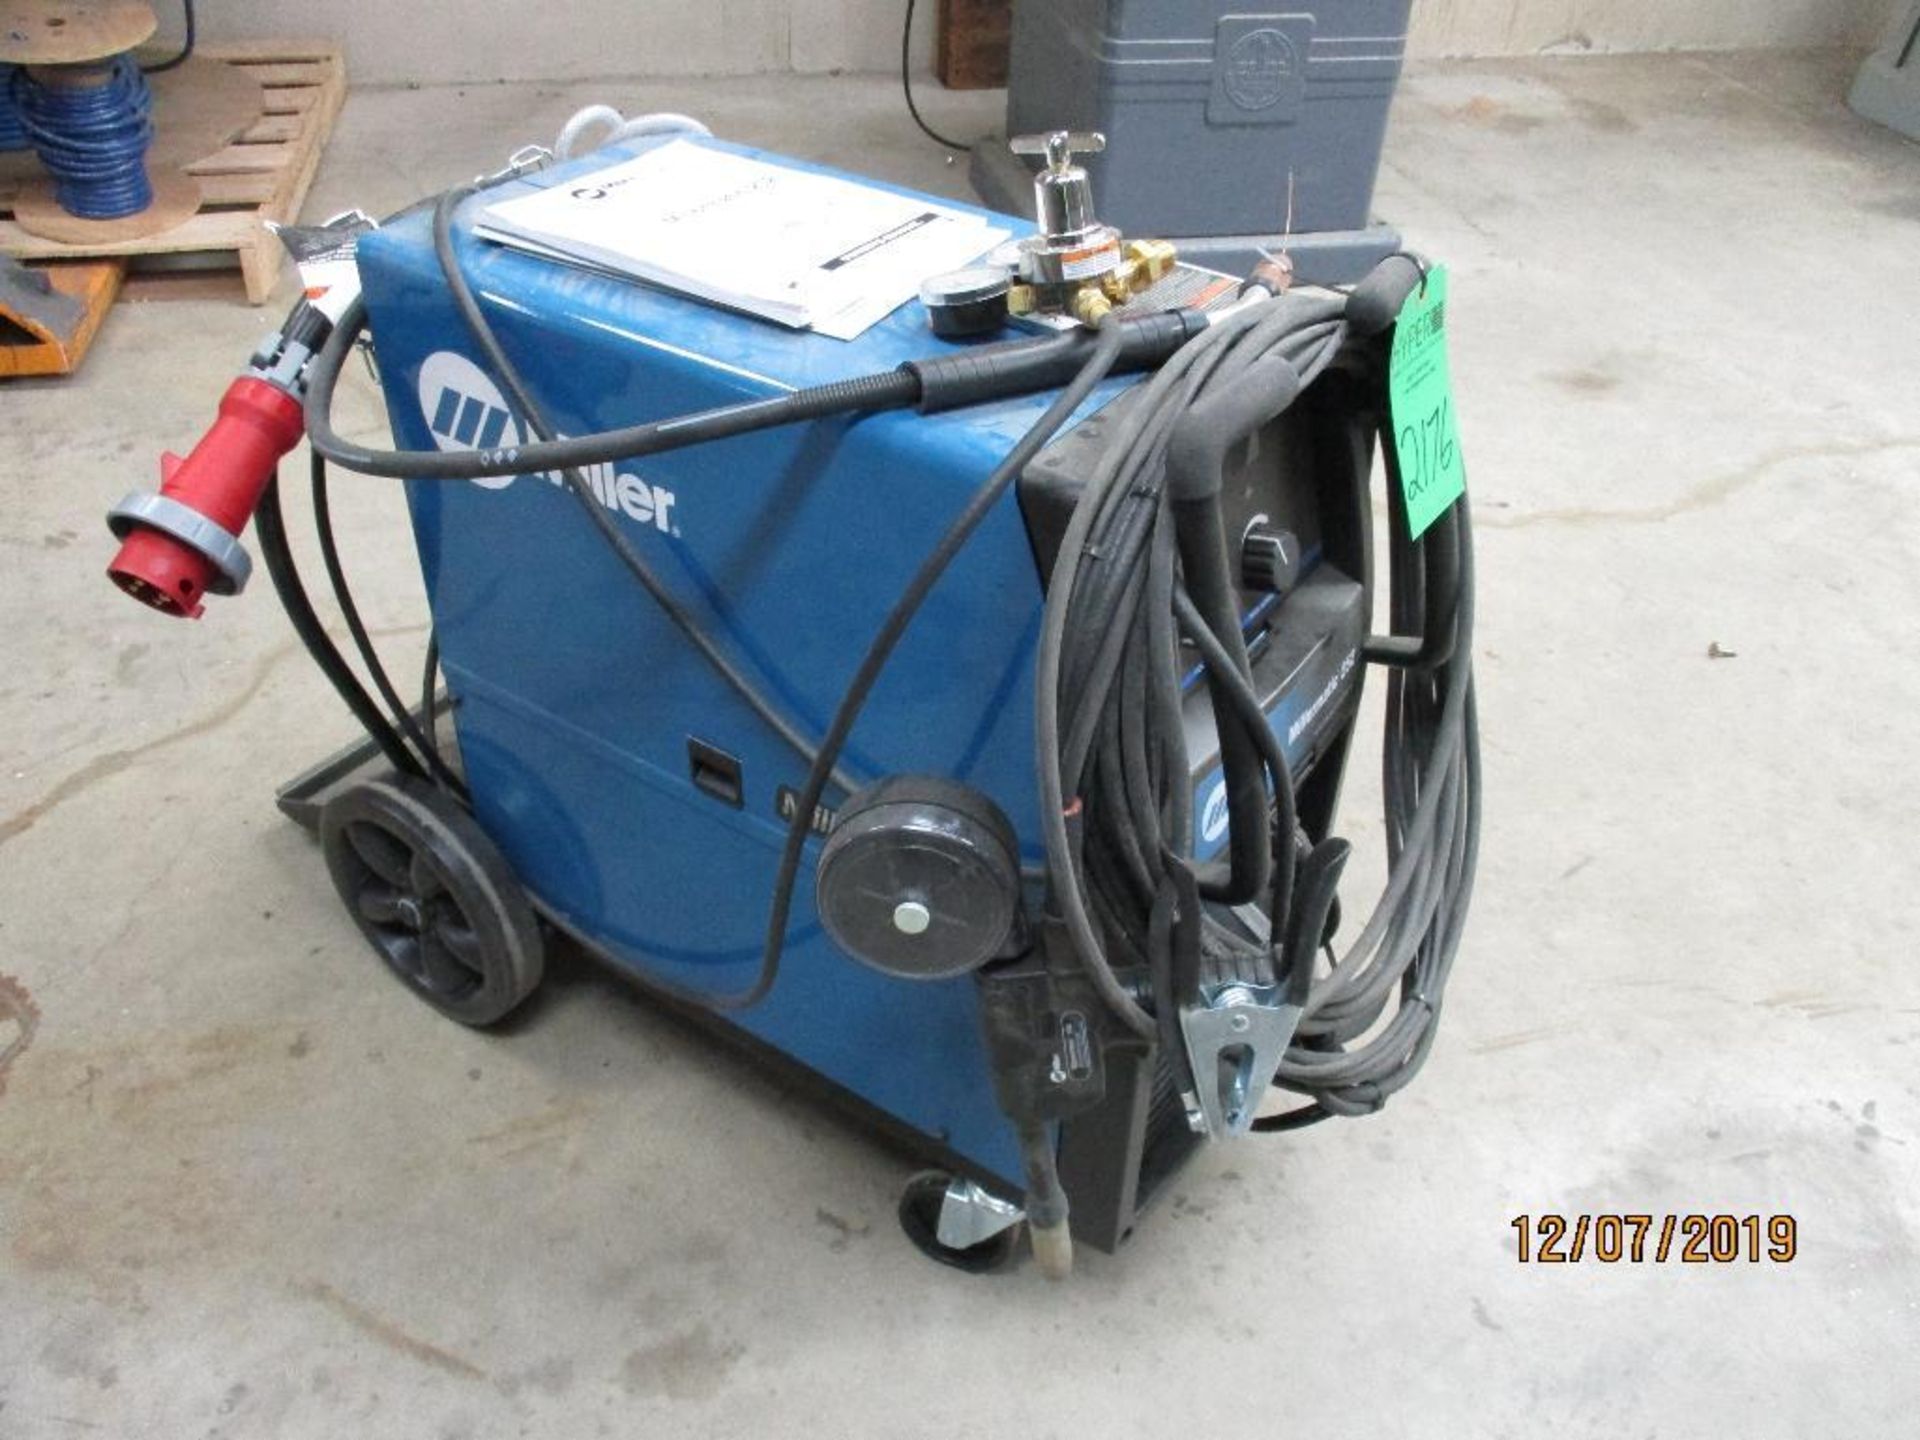 Miller Millermatic 252 Welding Cart With Spoolmaster 15-A Wire Feed S/N MH380377N - Image 2 of 6